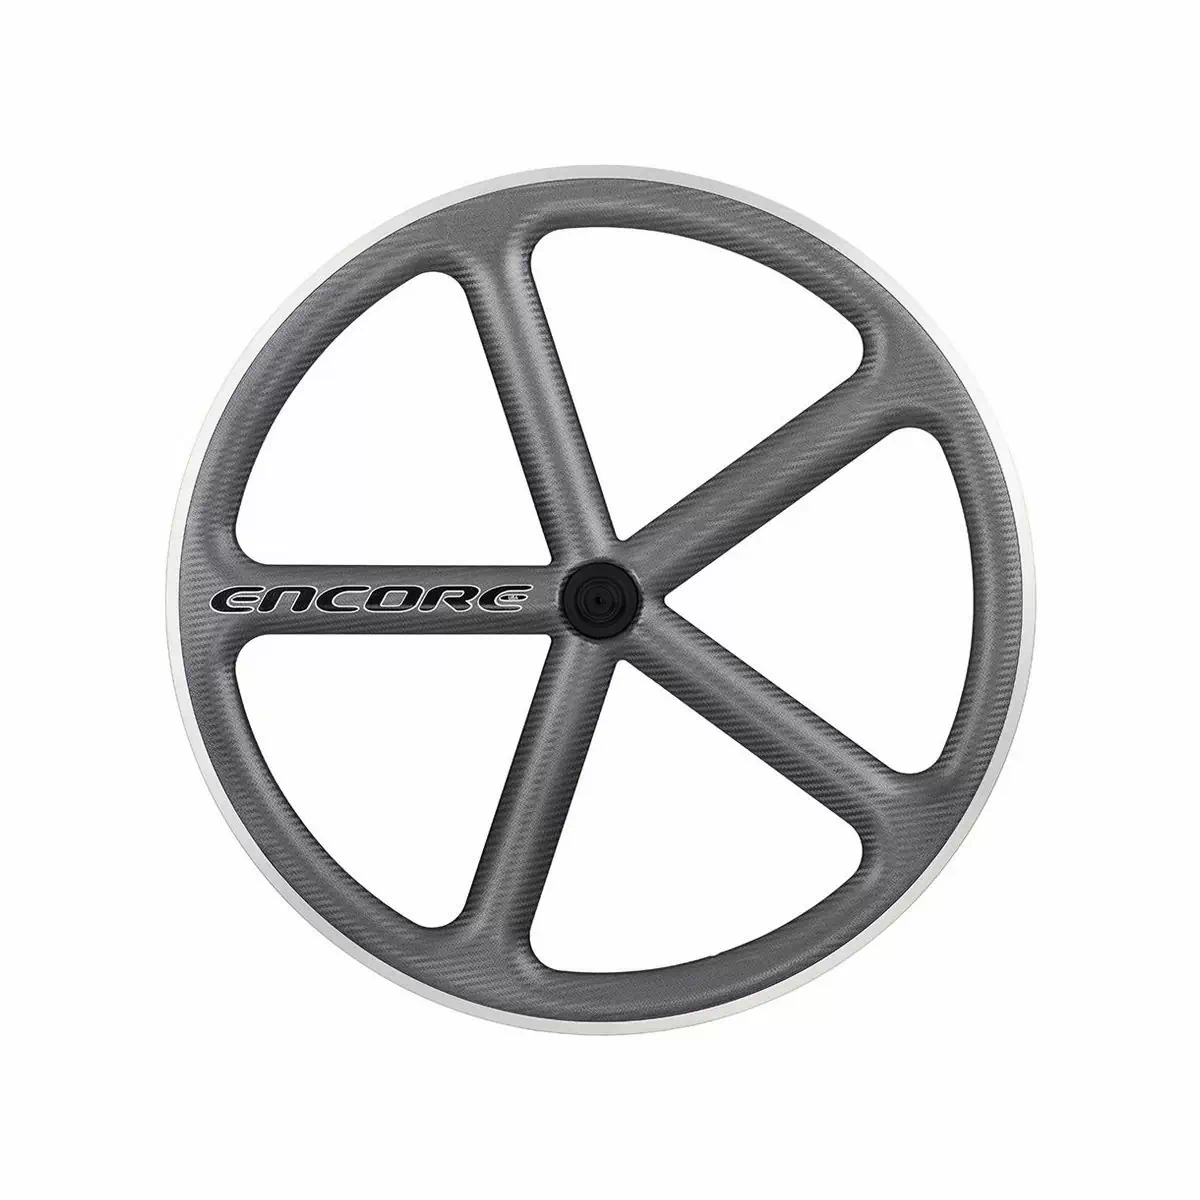 rear wheel 700c track 5 spokes carbon weave charcoal msw - image